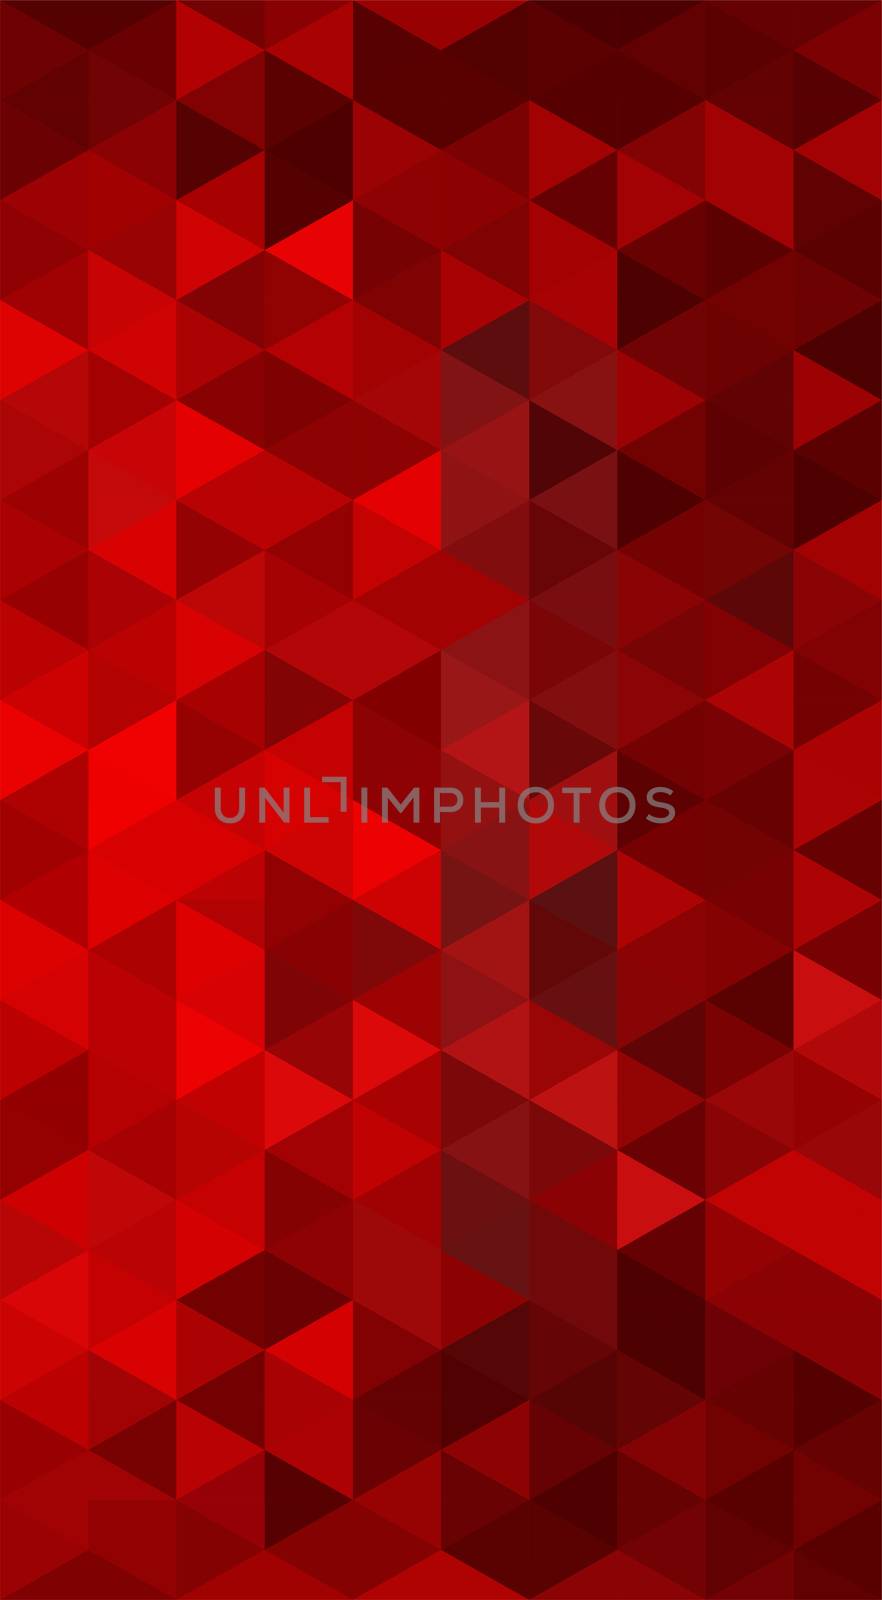 abstract red triangle background low poly illustration 